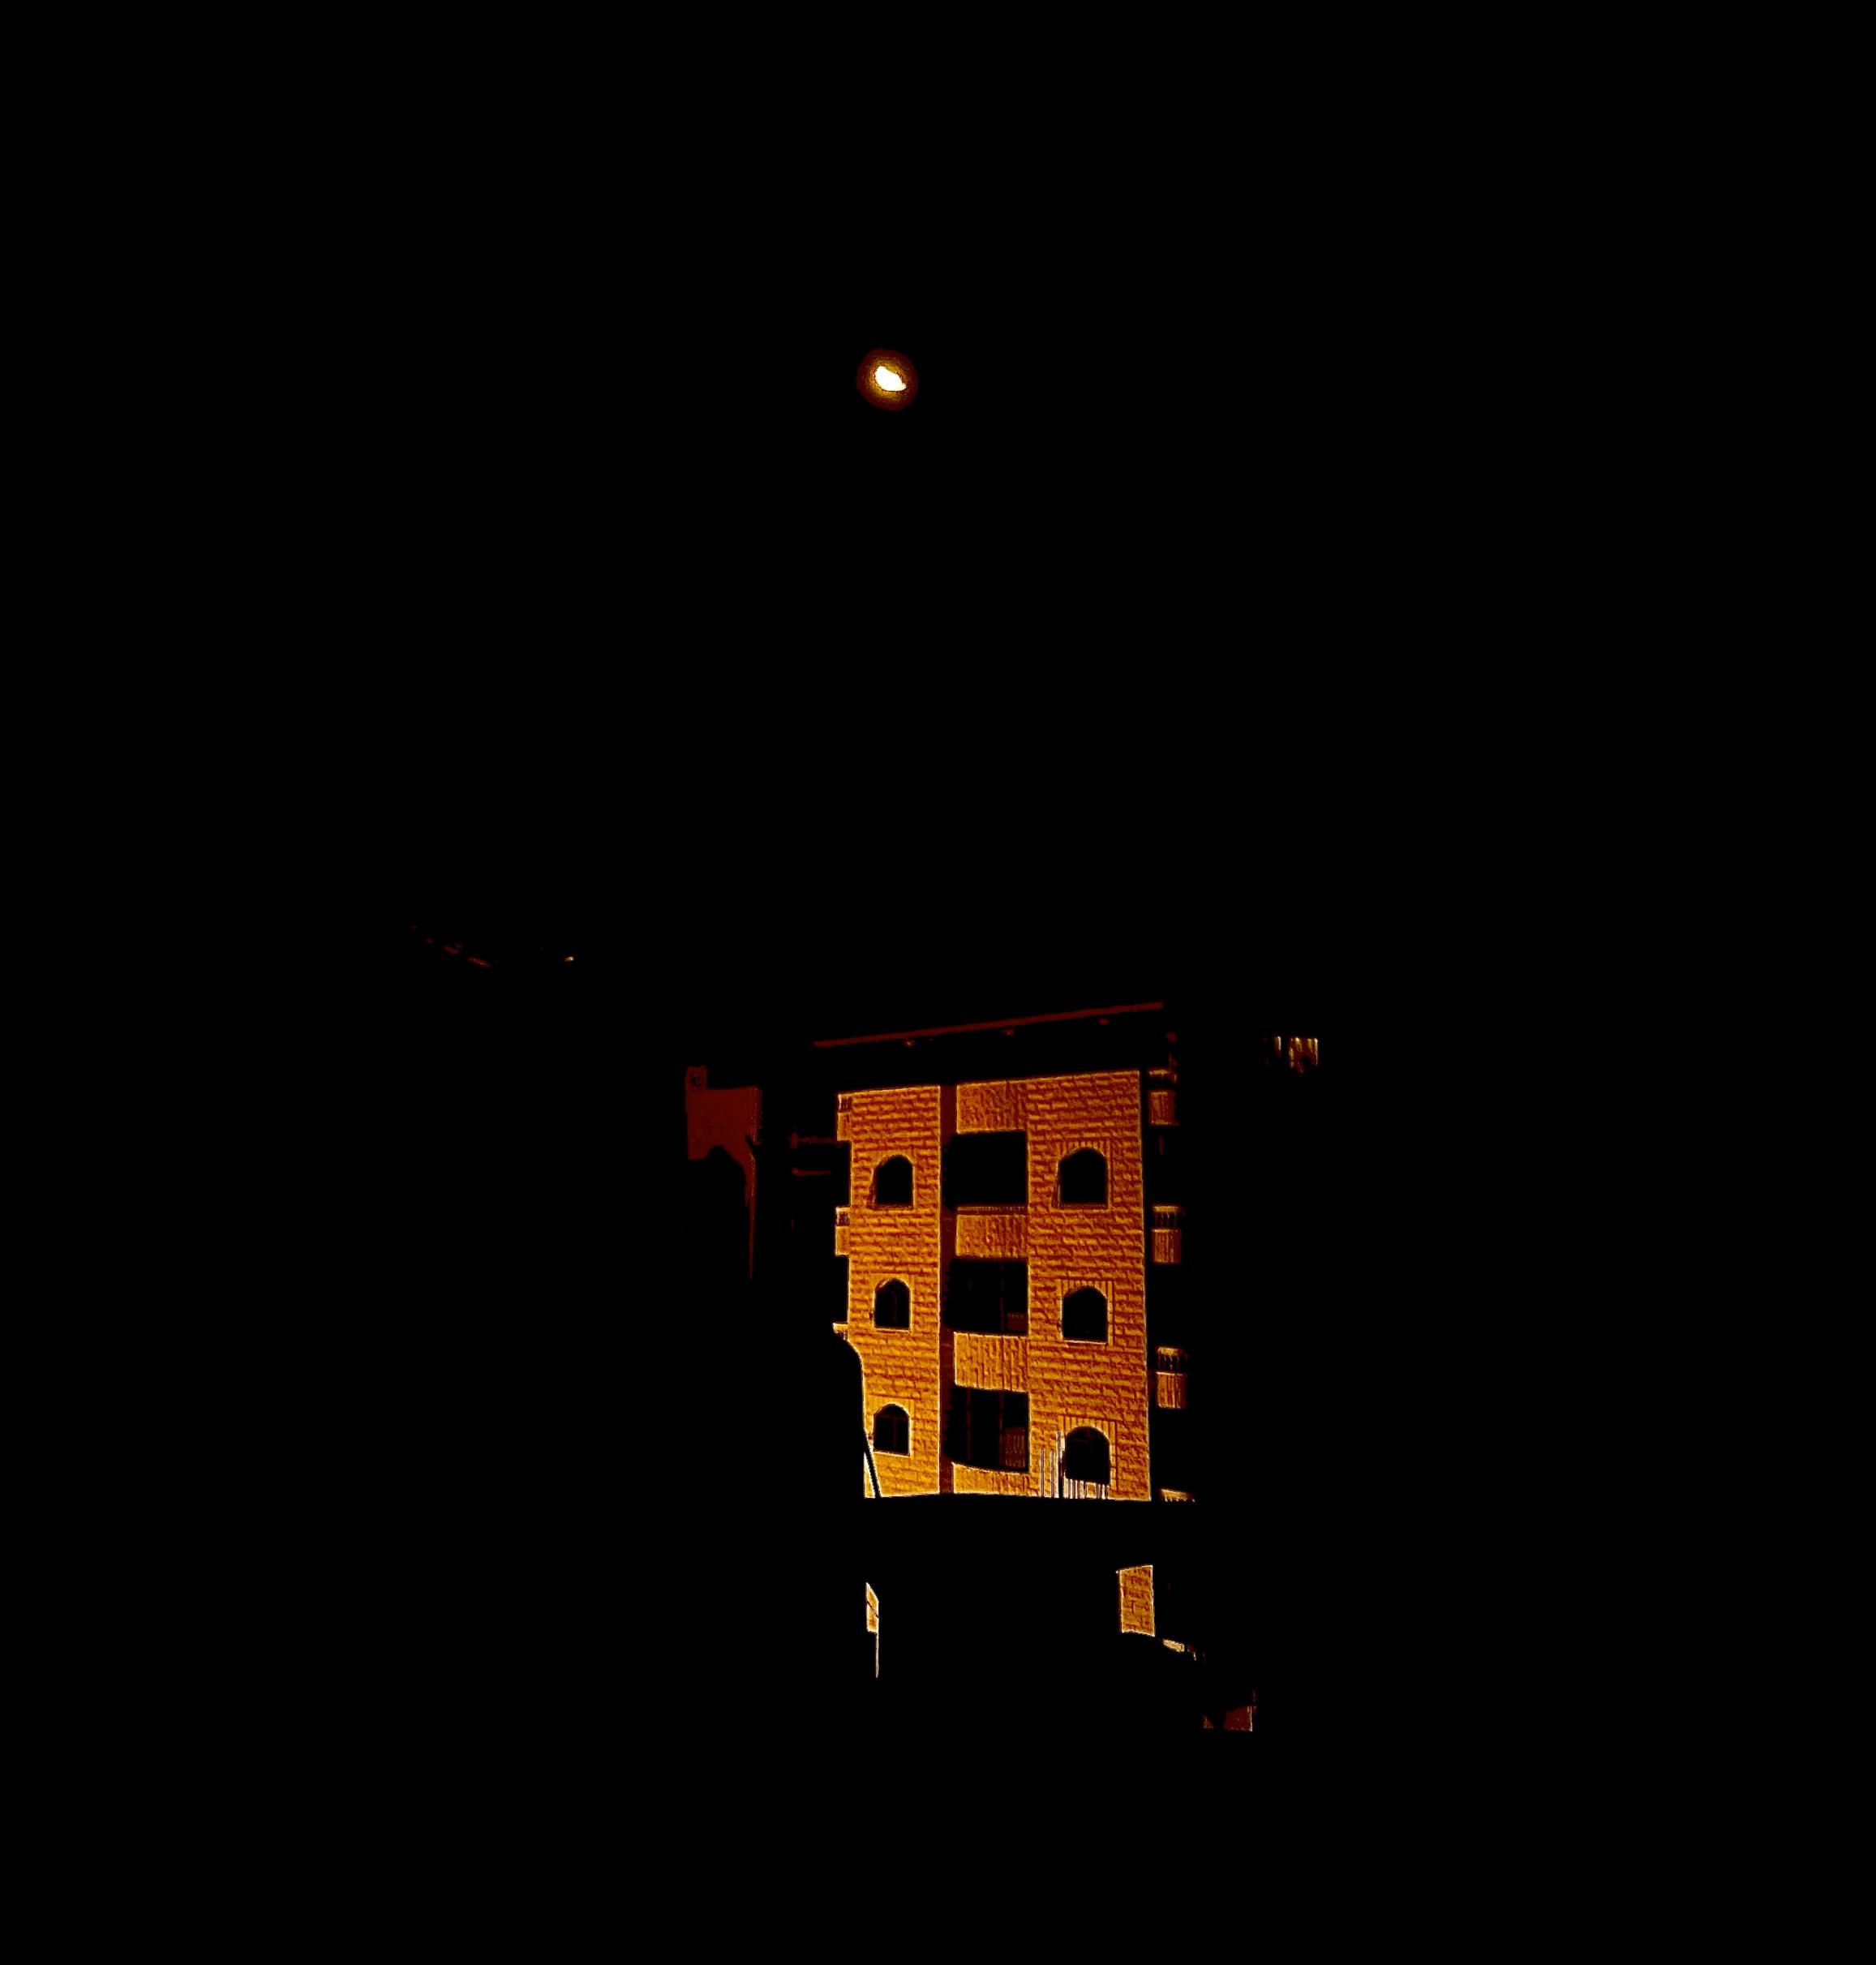 Apartment building in the nighttime, with moon above.